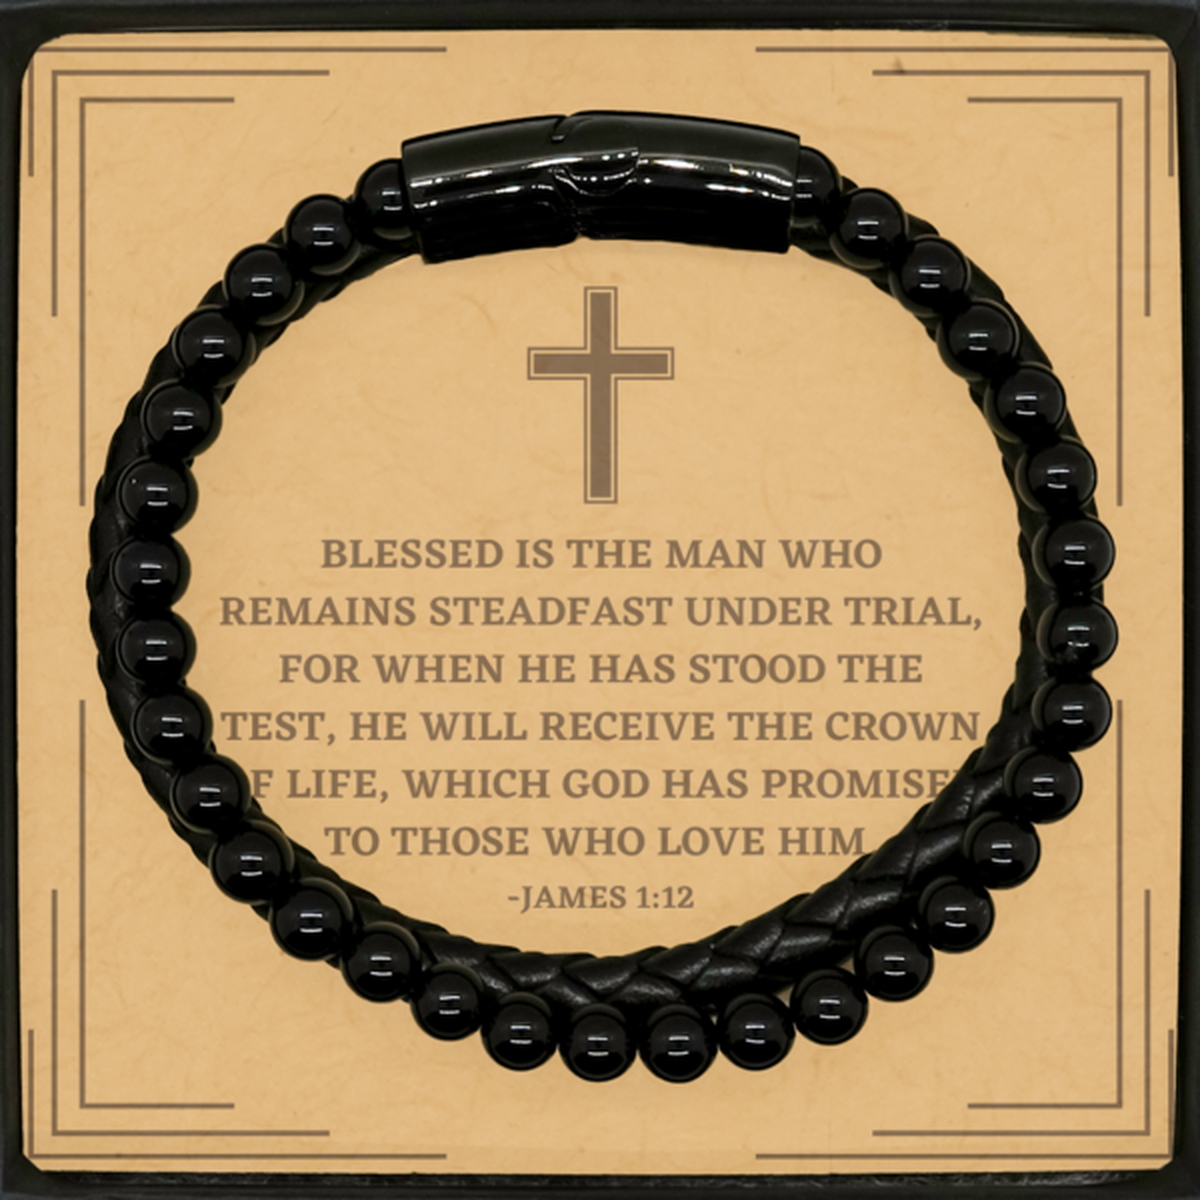 Baptism Gifts For Teenage Boys Girls, Christian Bible Verse Stone Leather Bracelet, Blessed is the man who remains, Confirmation Gifts, Bible Verse Card for Son, Godson, Grandson